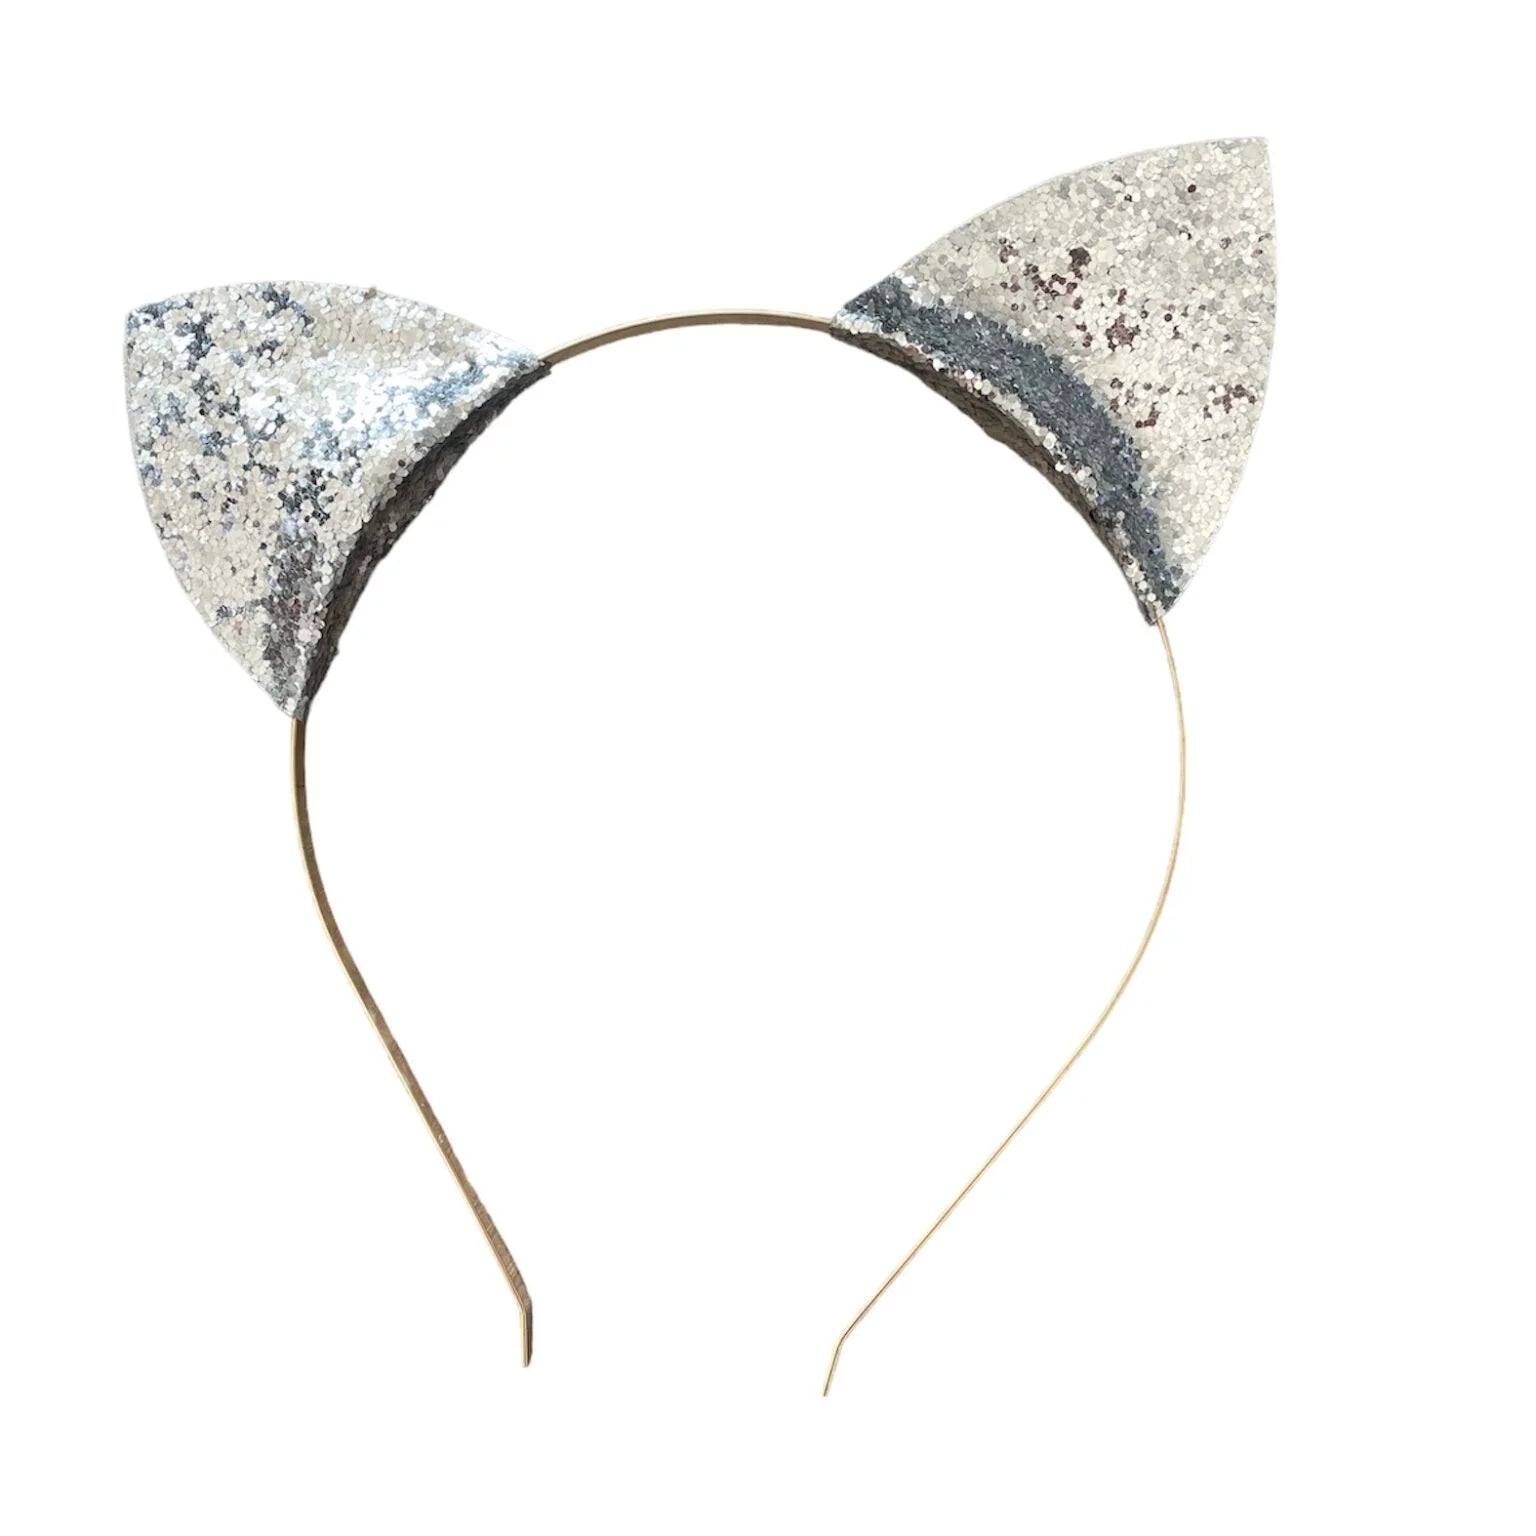 The Cat Head Band Silver